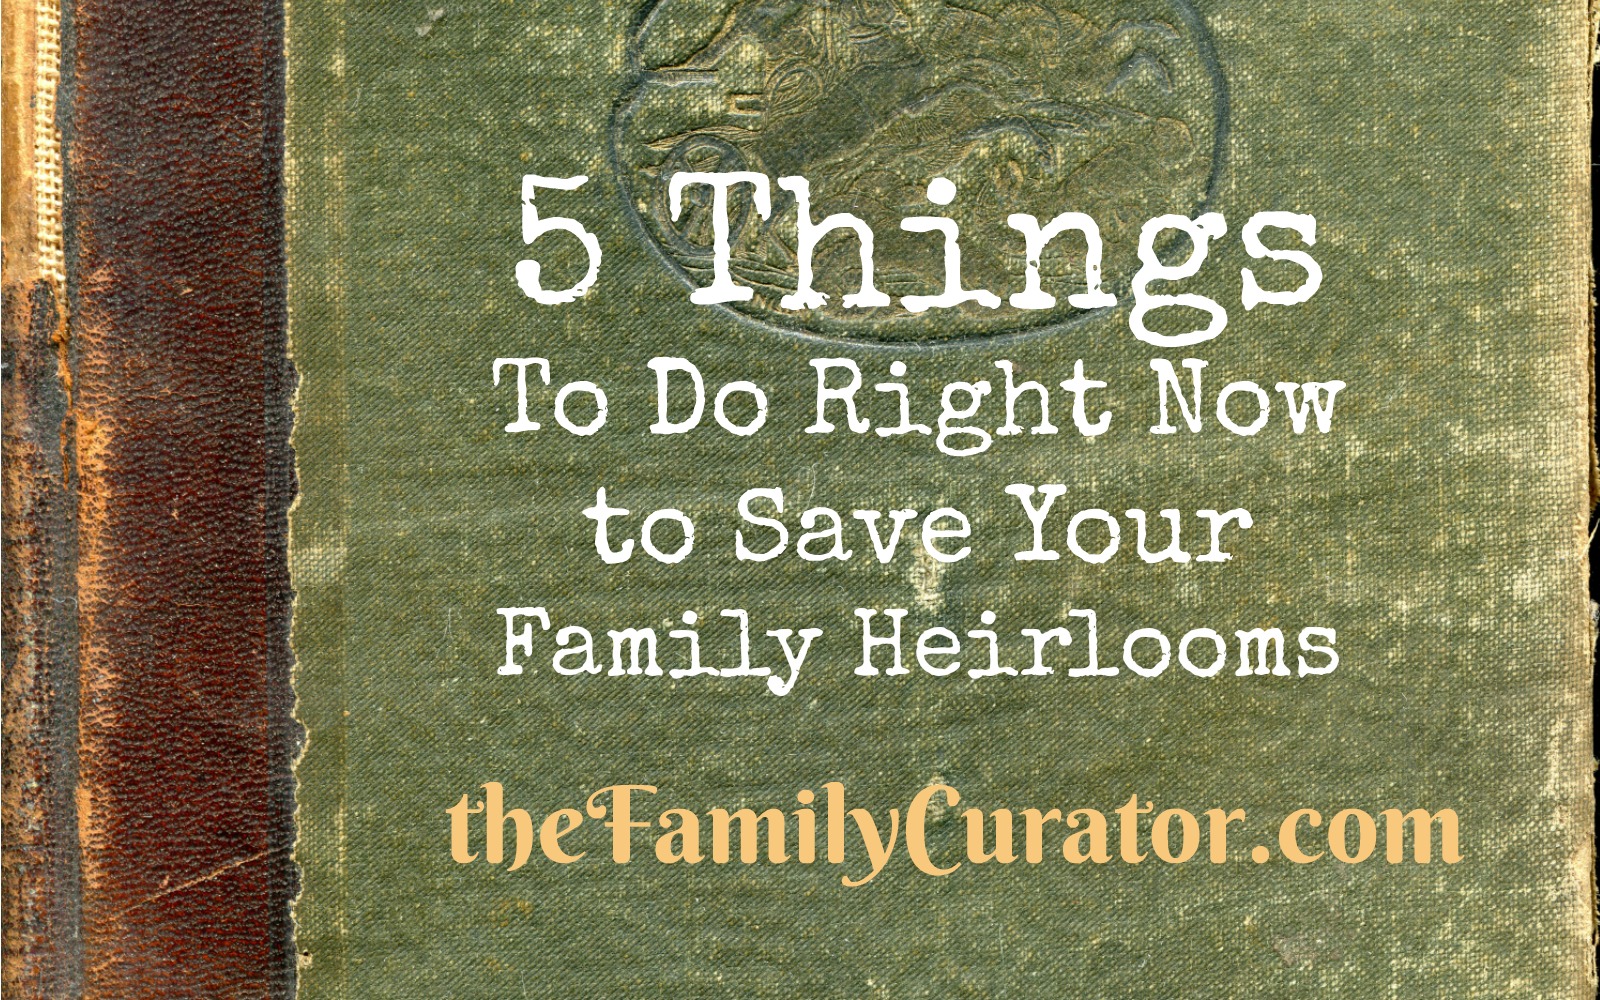 5 Things To Do to Save Your Family Photos and Heirlooms